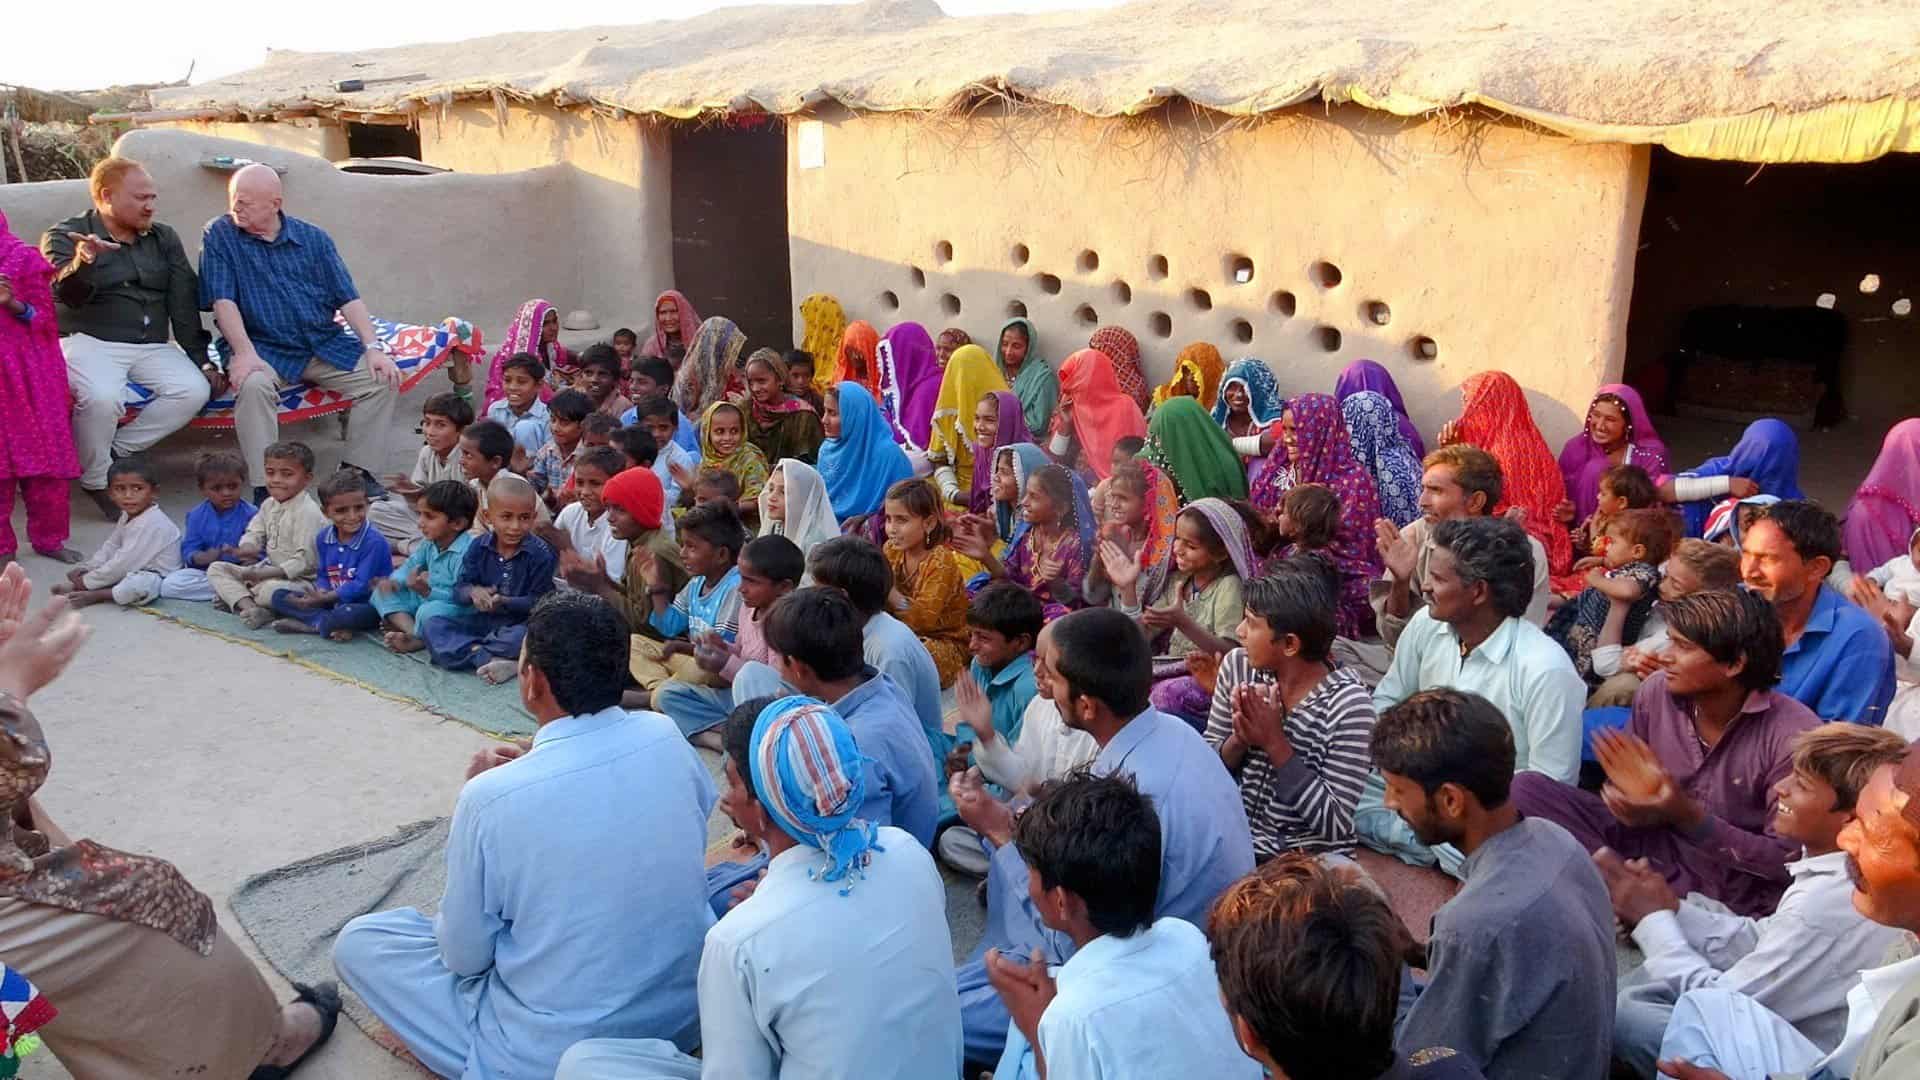 An outdoor gathering of a Pakistani church community in a desert setting, with members of all ages sitting on the ground, joyfully listening to the preached Word of God.